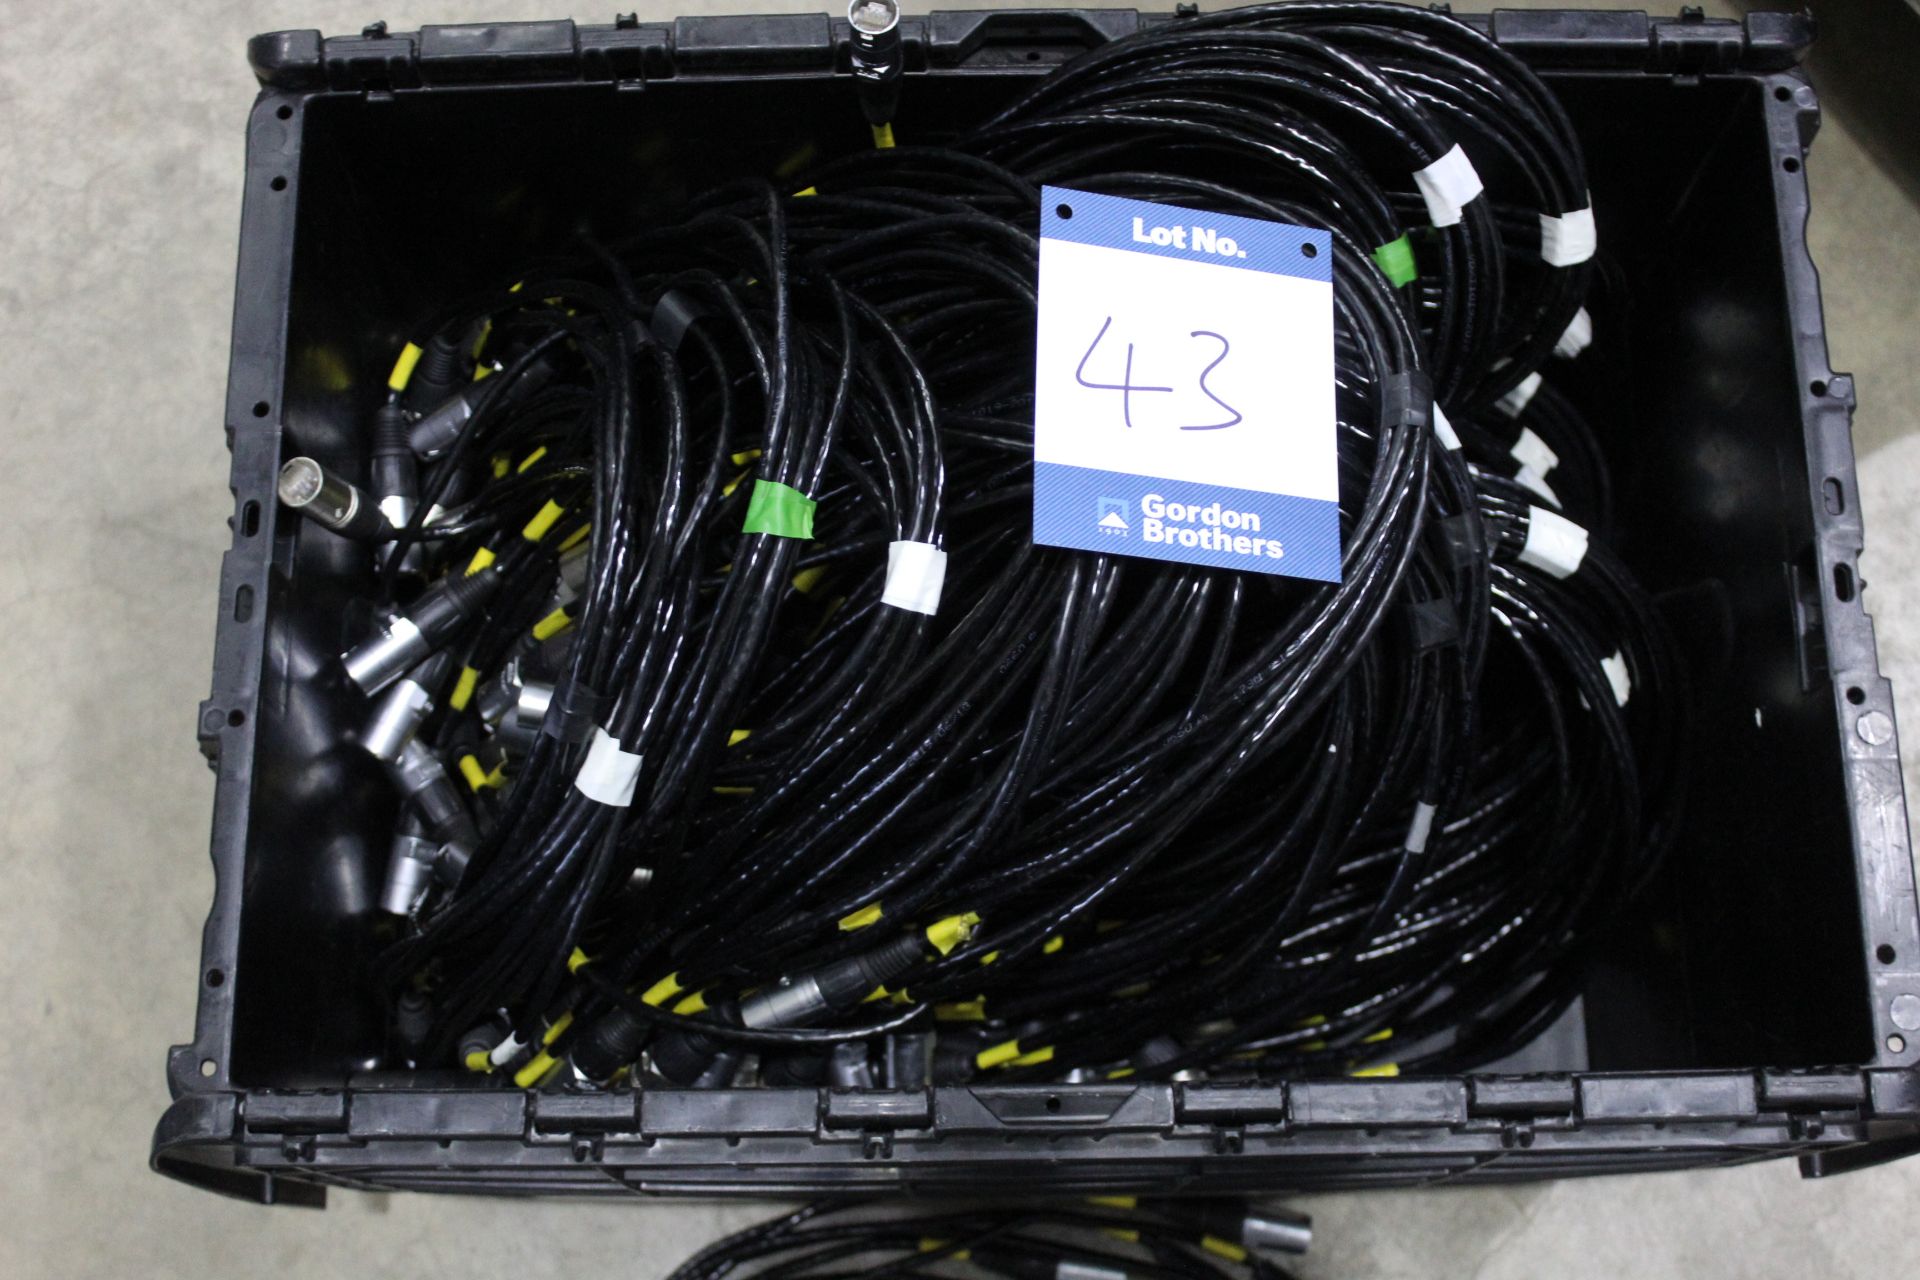 Approx. 284x 0.9m CAT5 cables in 600mm x 400mm plastic tote bin used for P2.6 LED display. (PLEASE